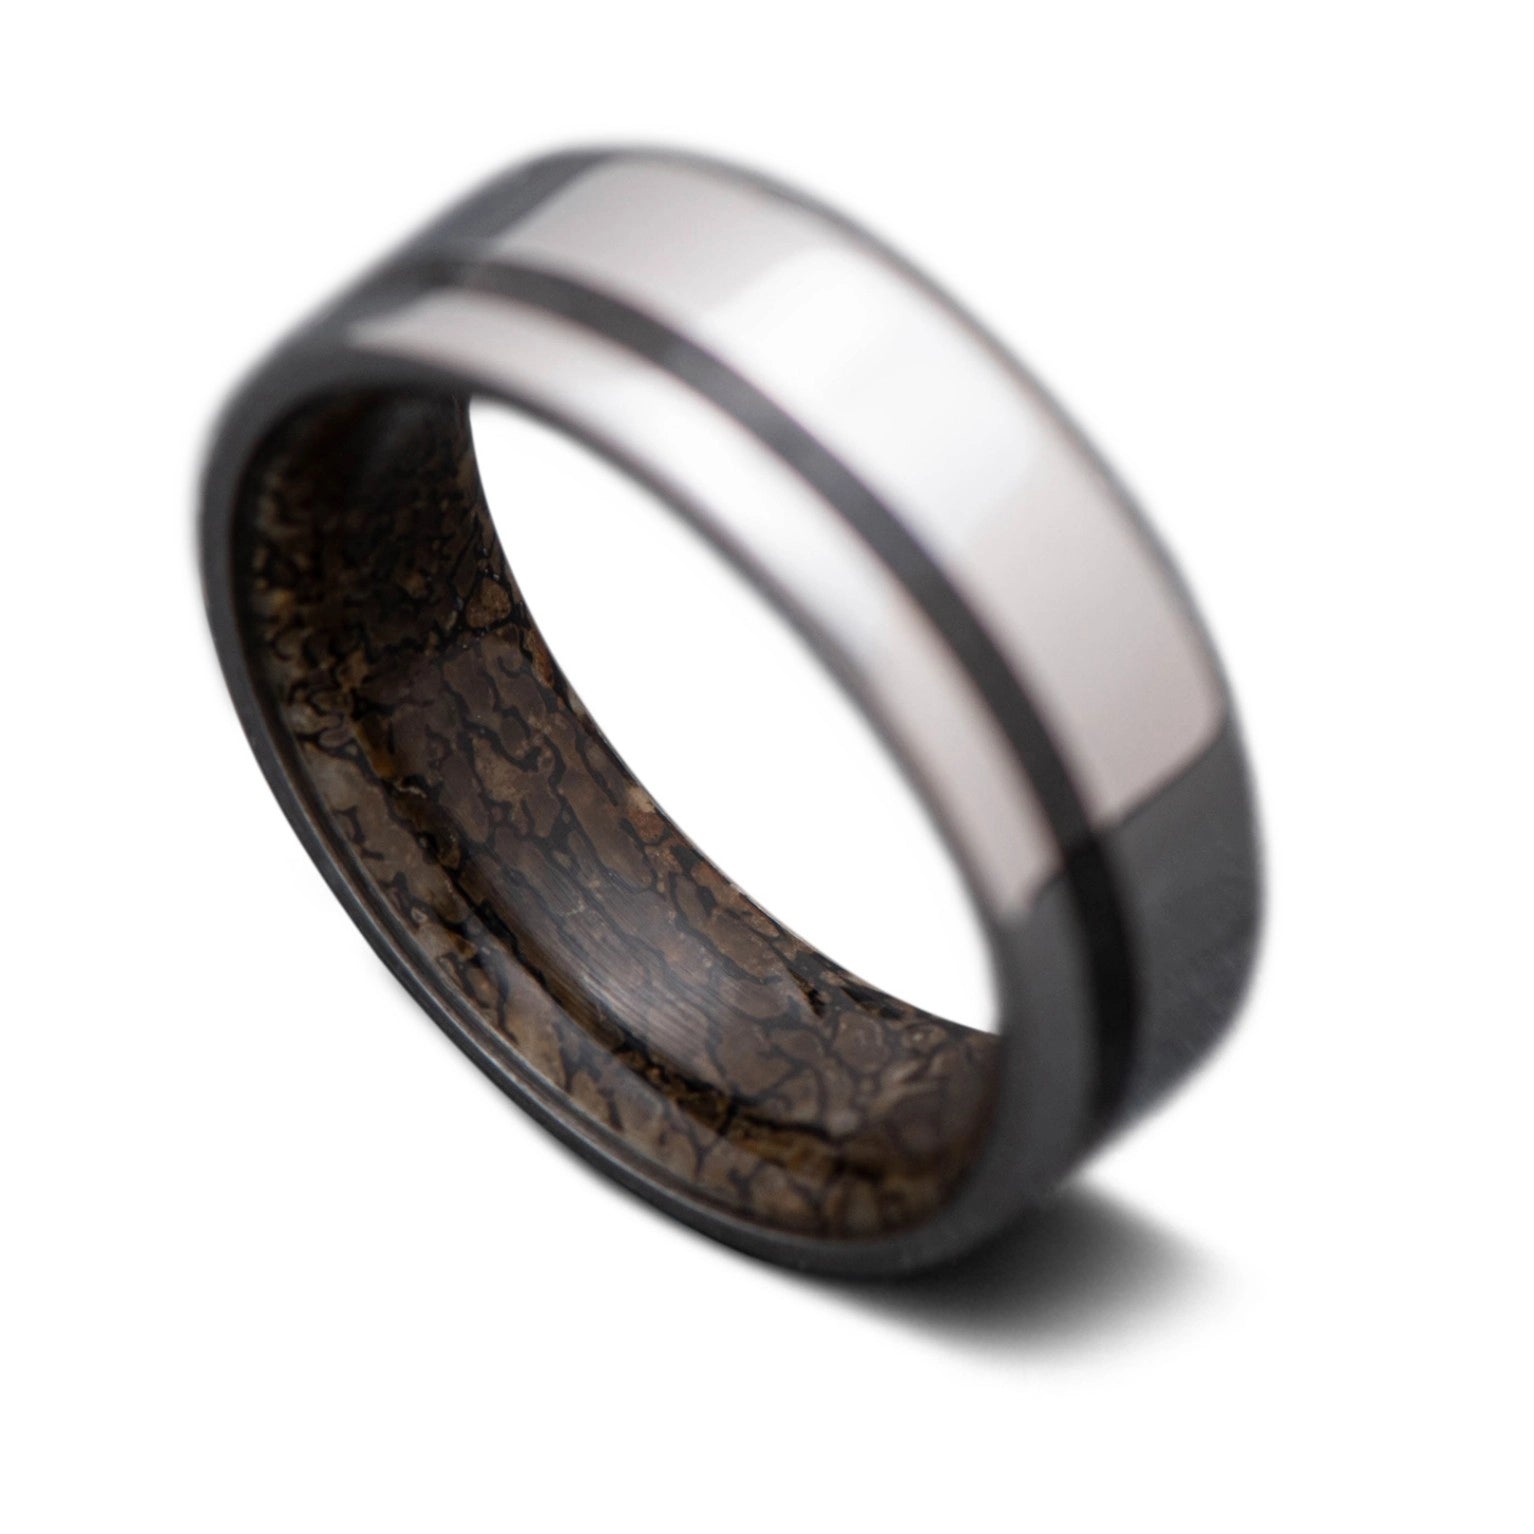 Back of Titanium Core Ring with  Black Onyx inlay and T-Rex inner sleeve, 7mm -THE SHIFT